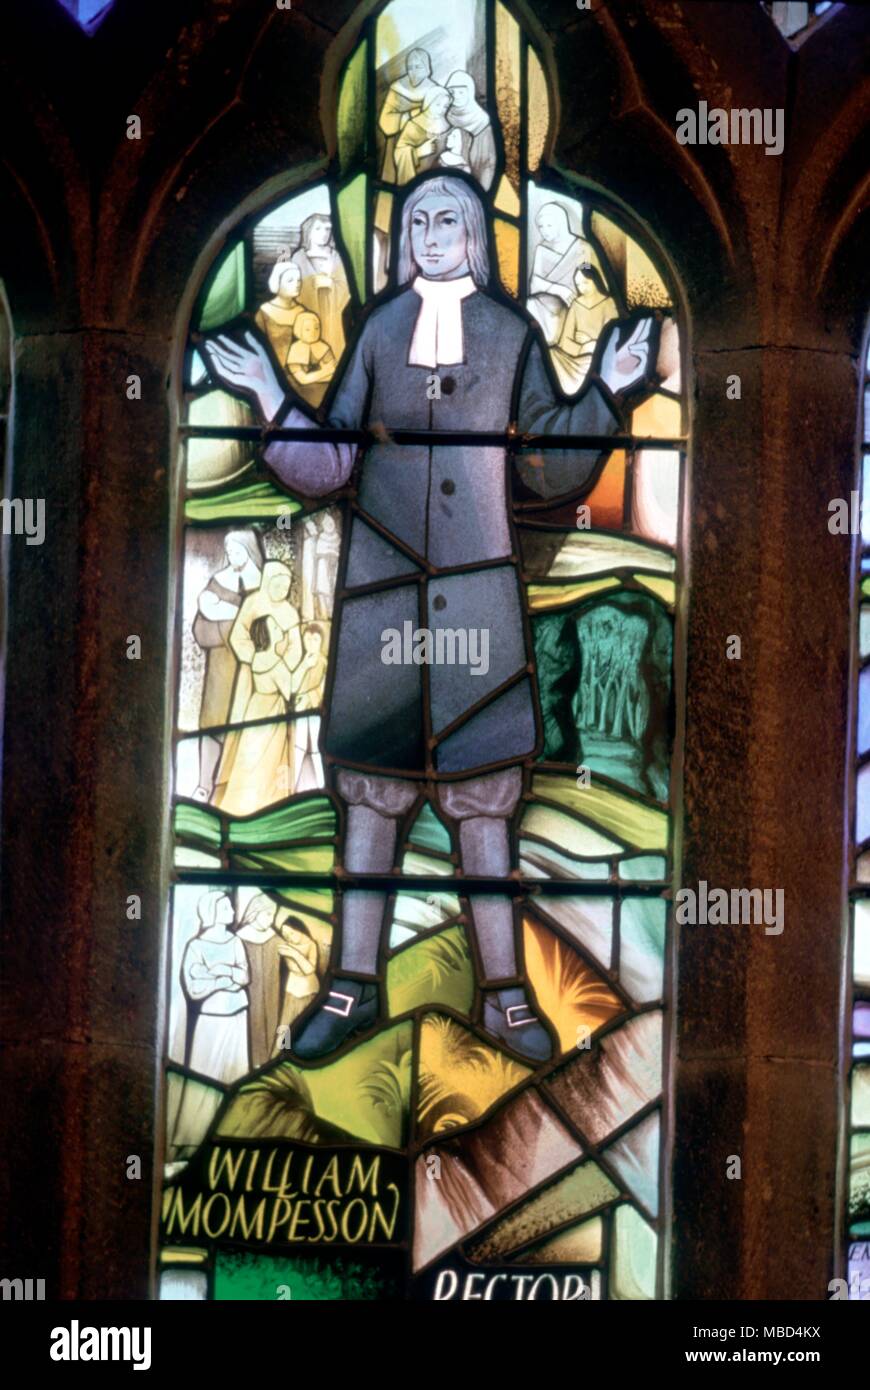 The Mompasson memorial window in the Paris church of Eyam, depicting stages in the development of the plague of 1665, in which the villagers were persuaded to remain in the village, and meet their deaths calmly. © / Charles Walker Stock Photo